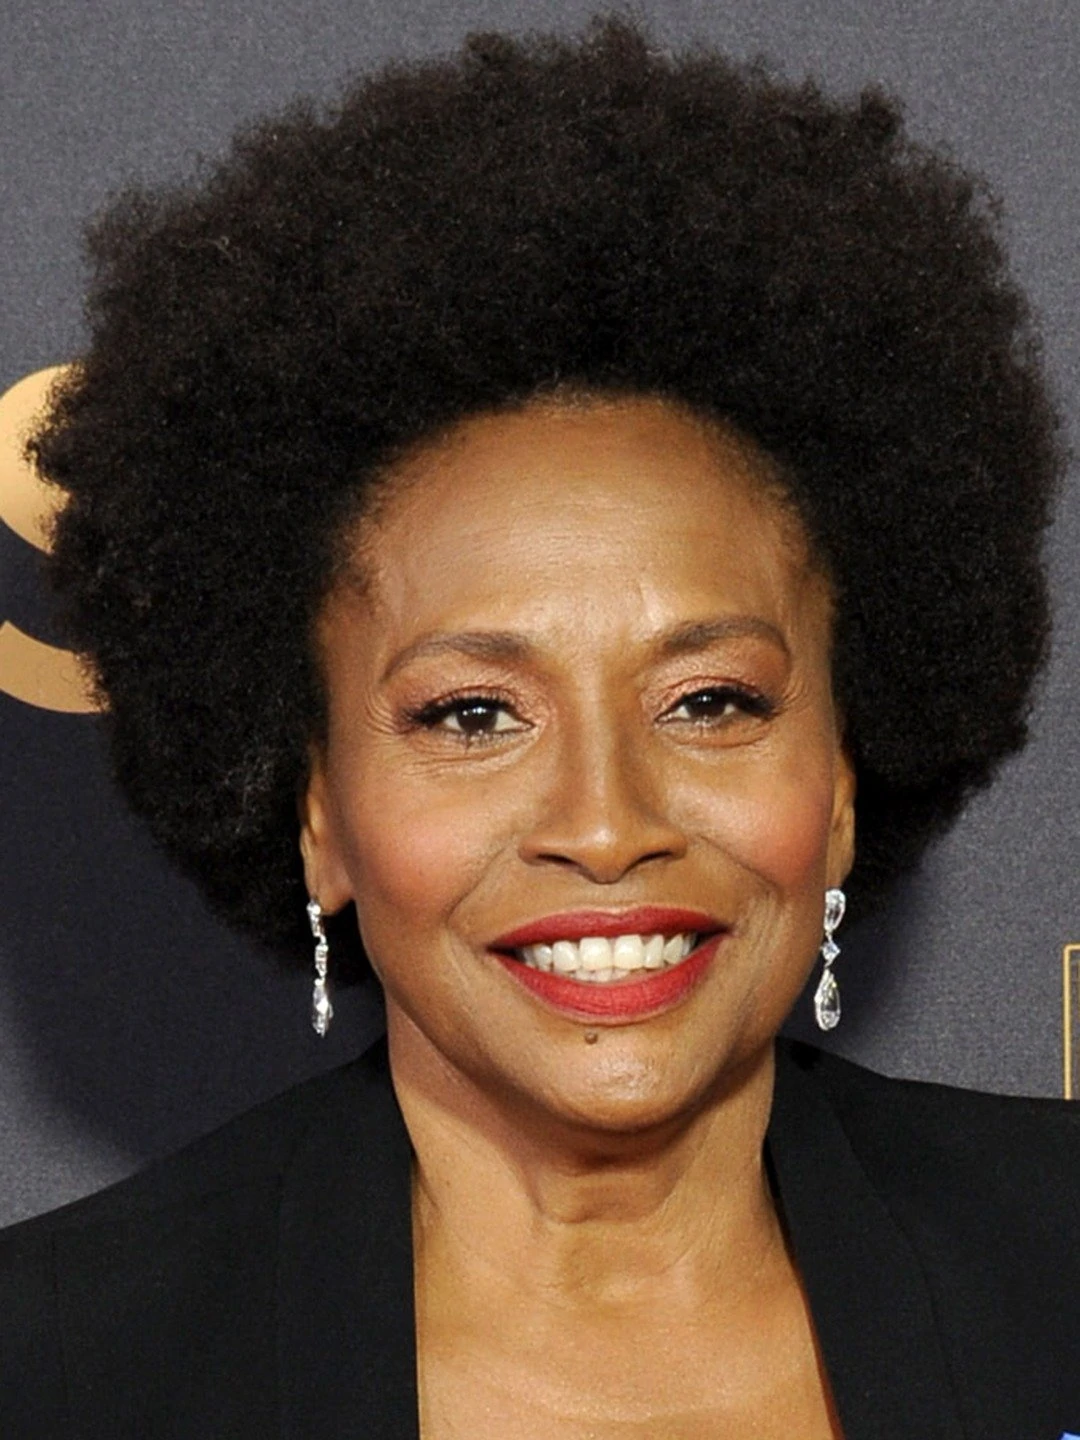 Do you want to know about Jenifer Lewis’ background